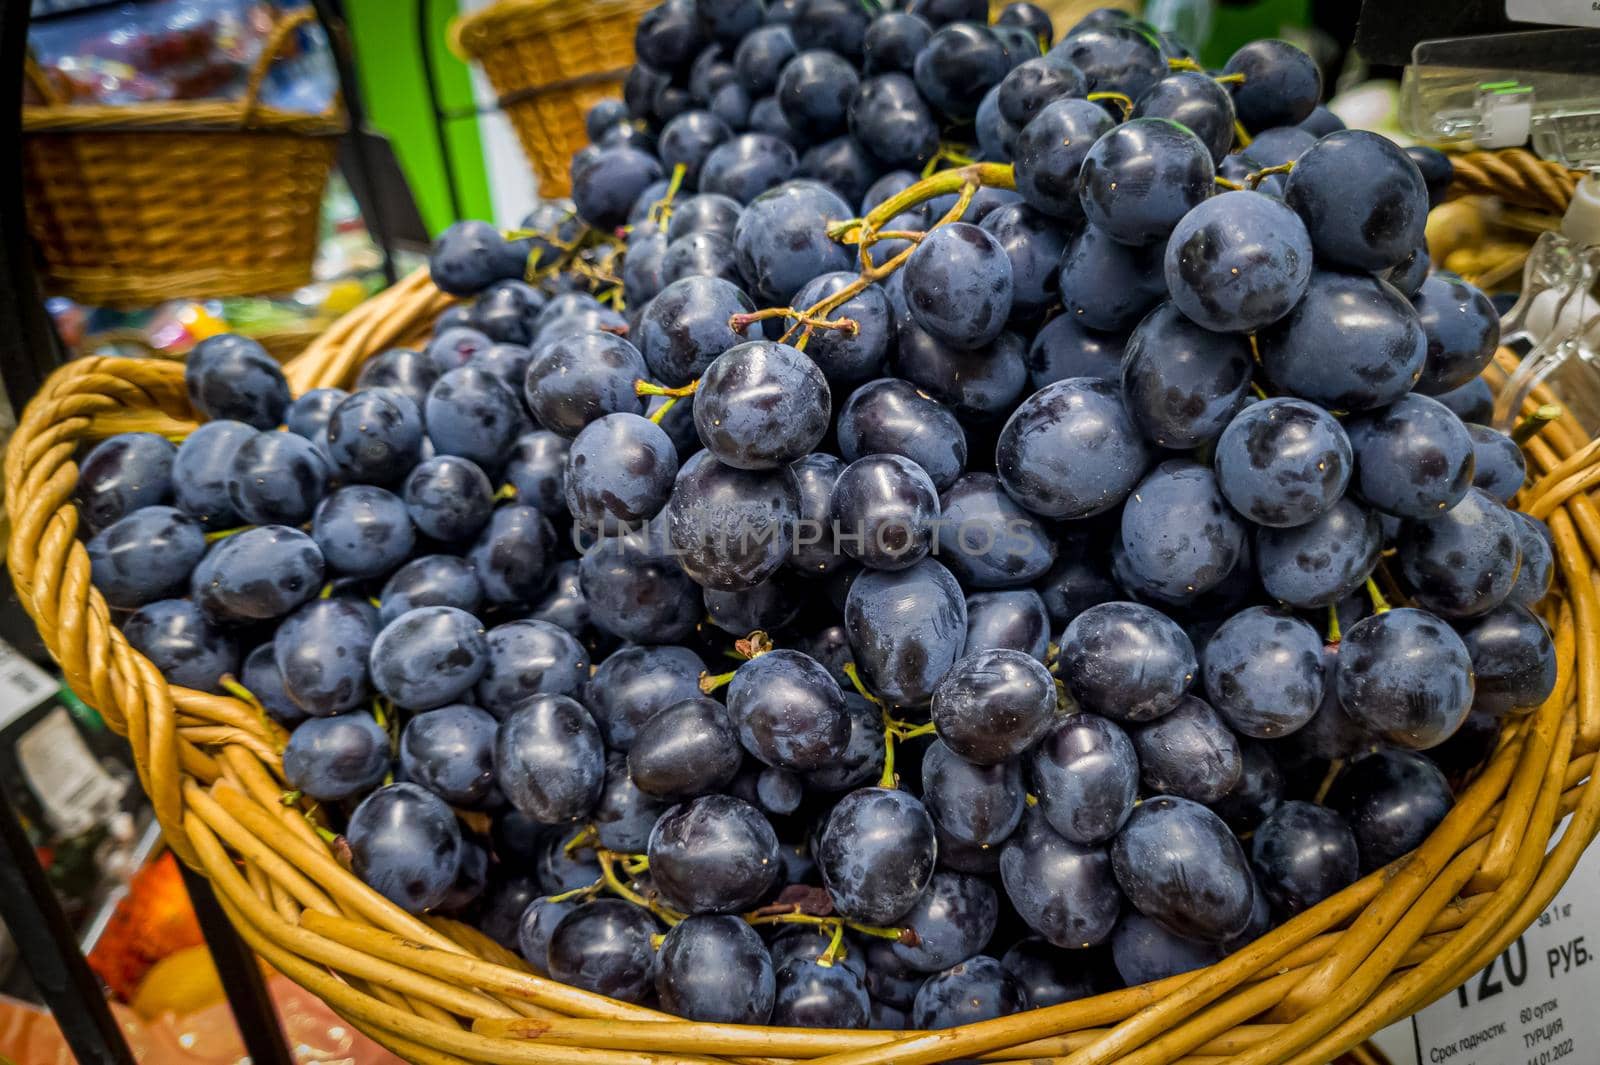 Bunches of blue grapes are in a basket in the store.